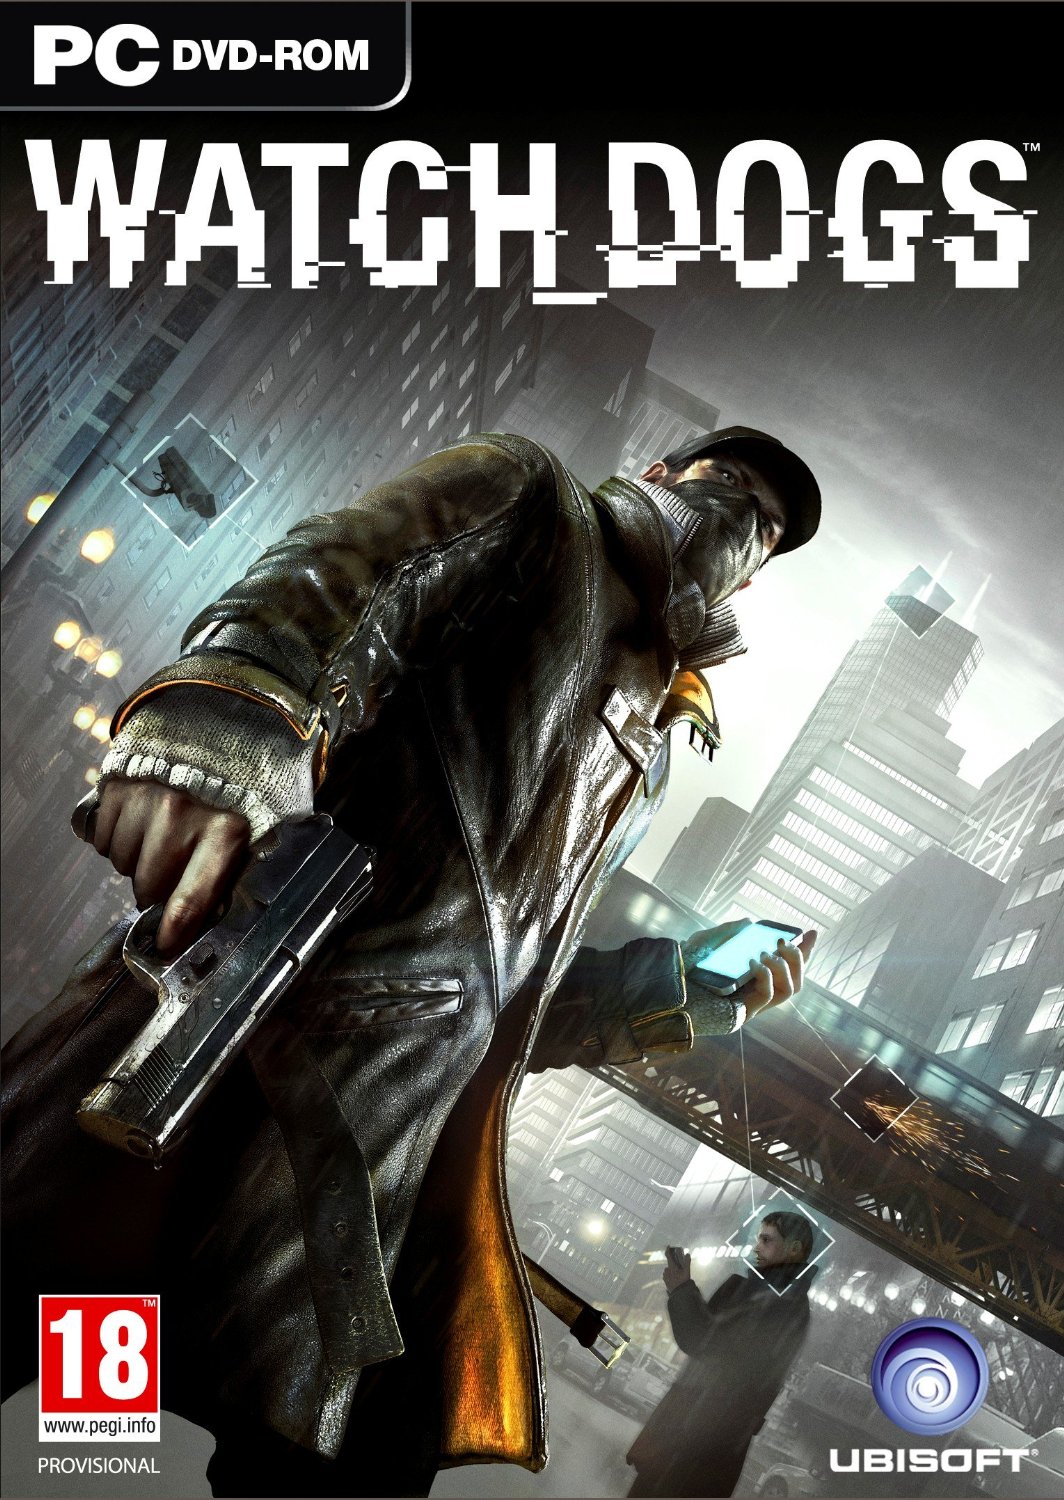 Watch Dogs CD Key for Ubisoft Connect: Day 1 Special Edition (Multi-Language)